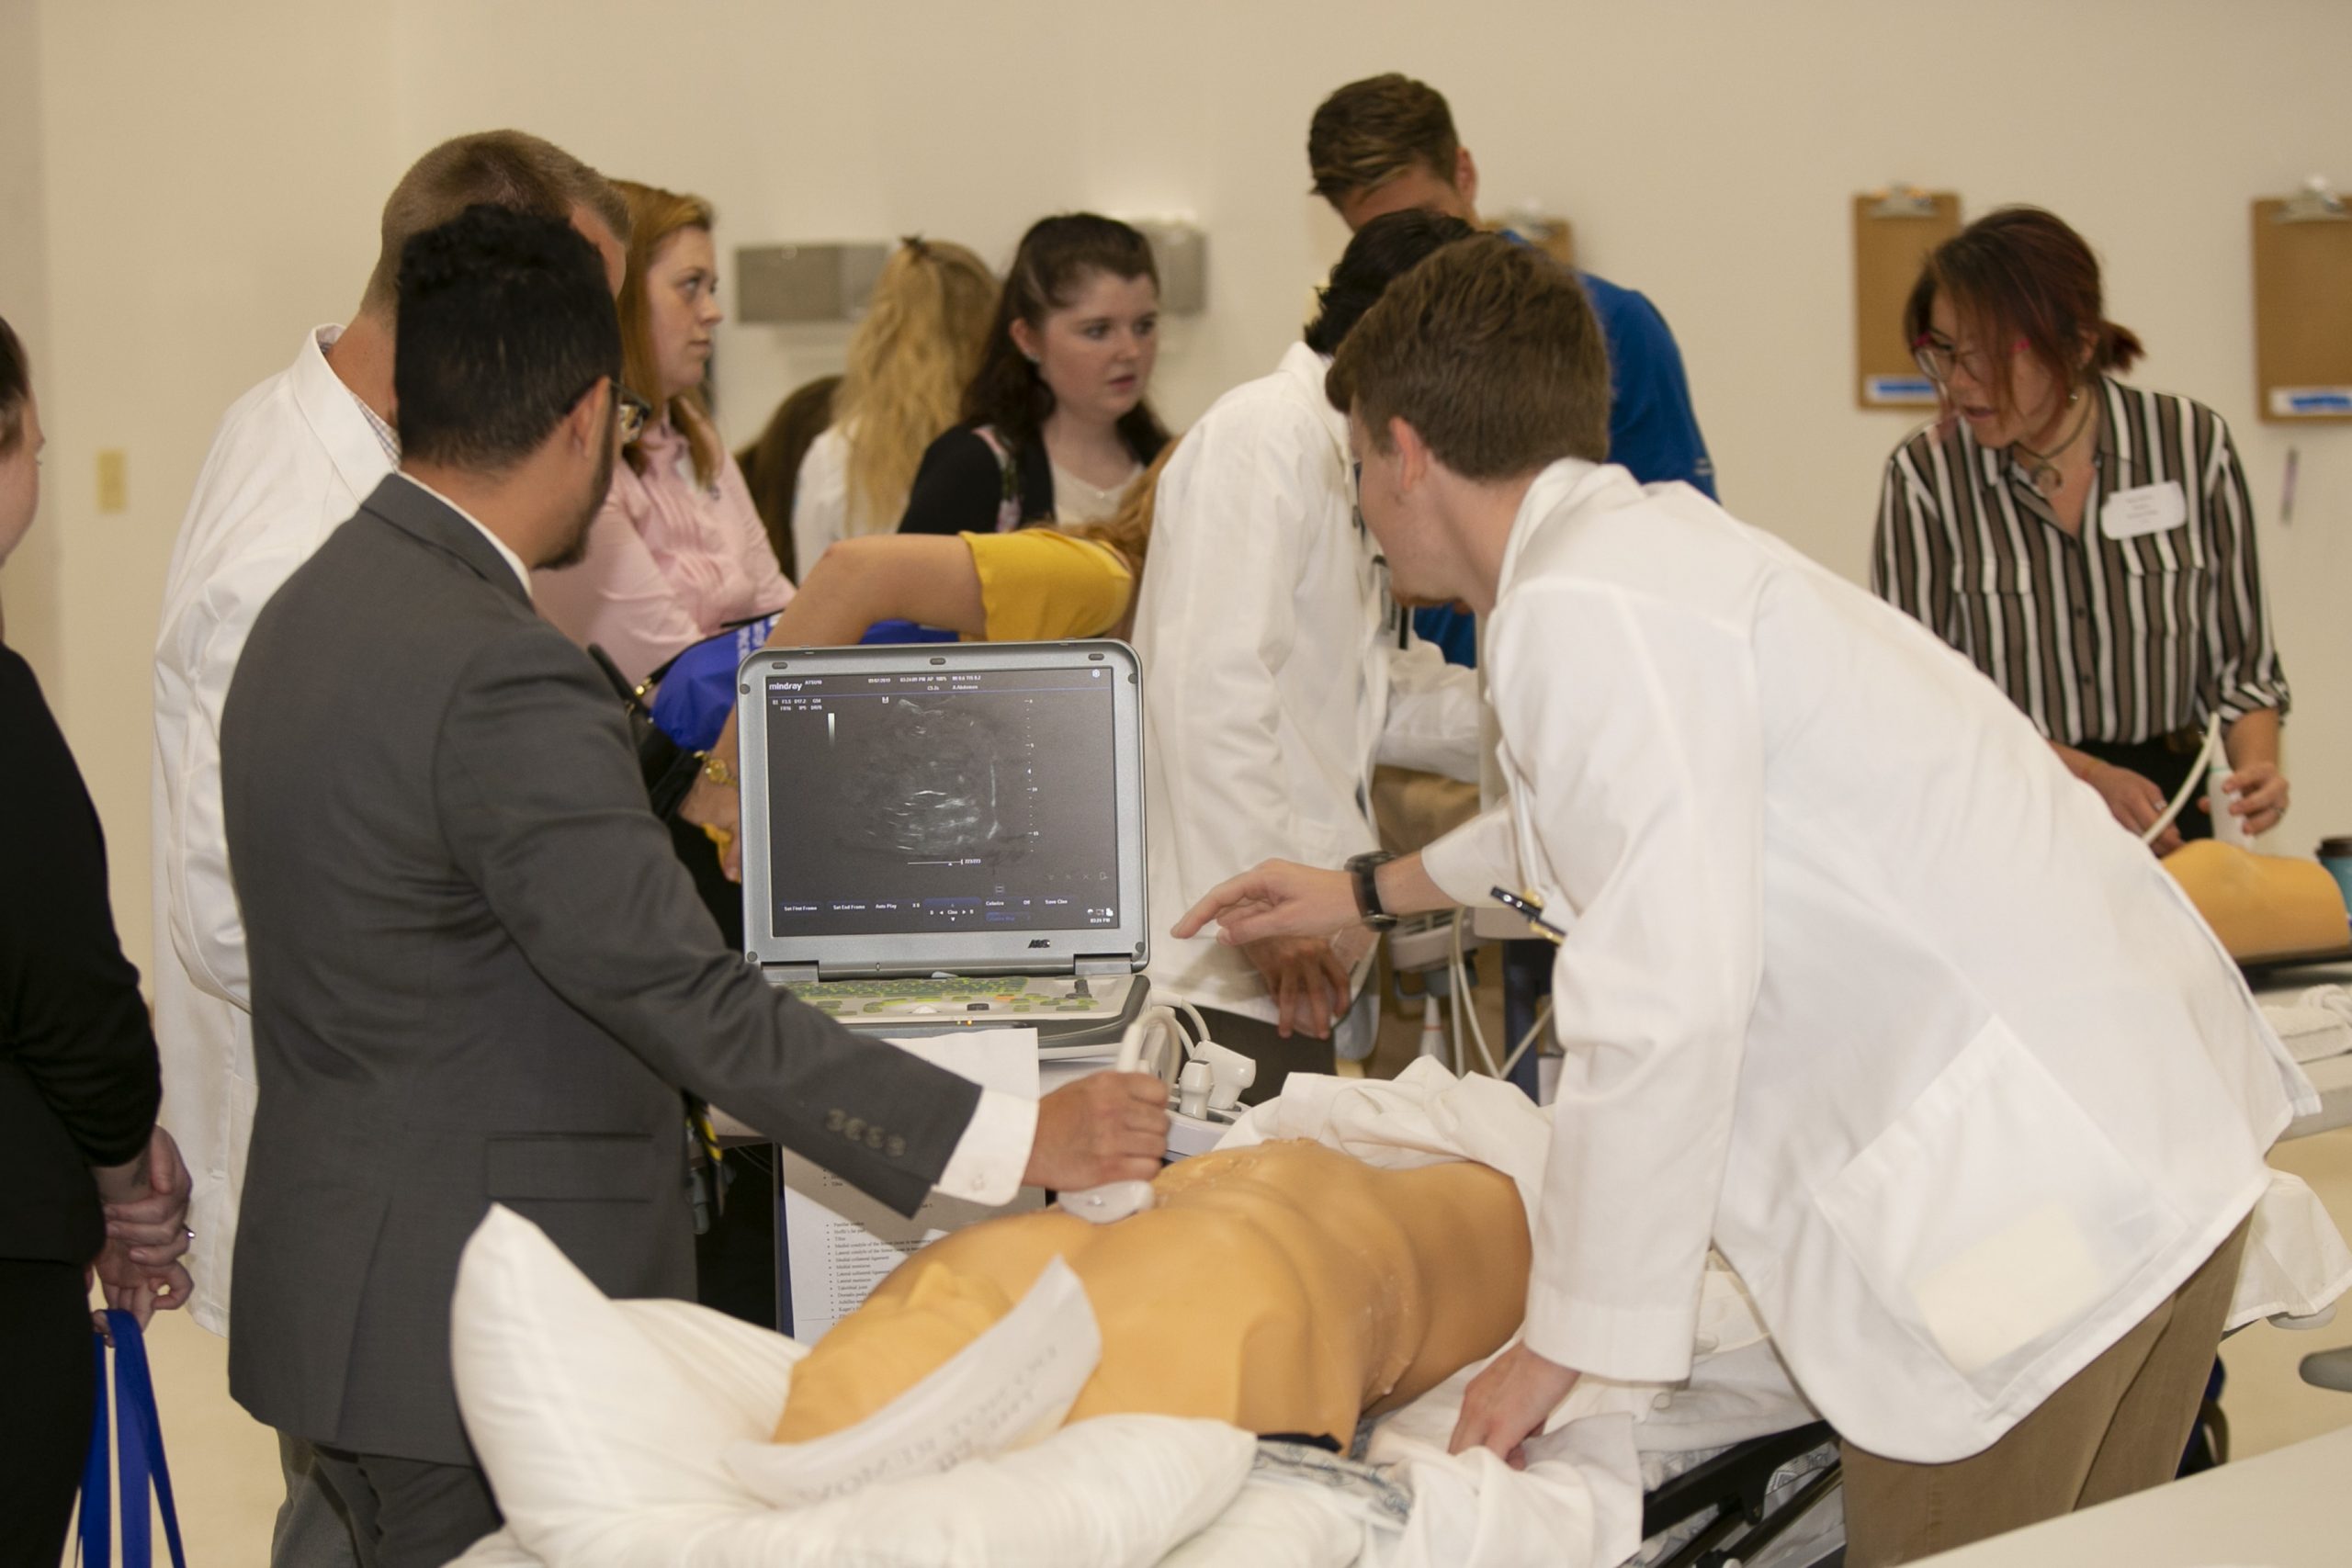 2019 Heartland PreMed Conference attendees participate in hands-on lab